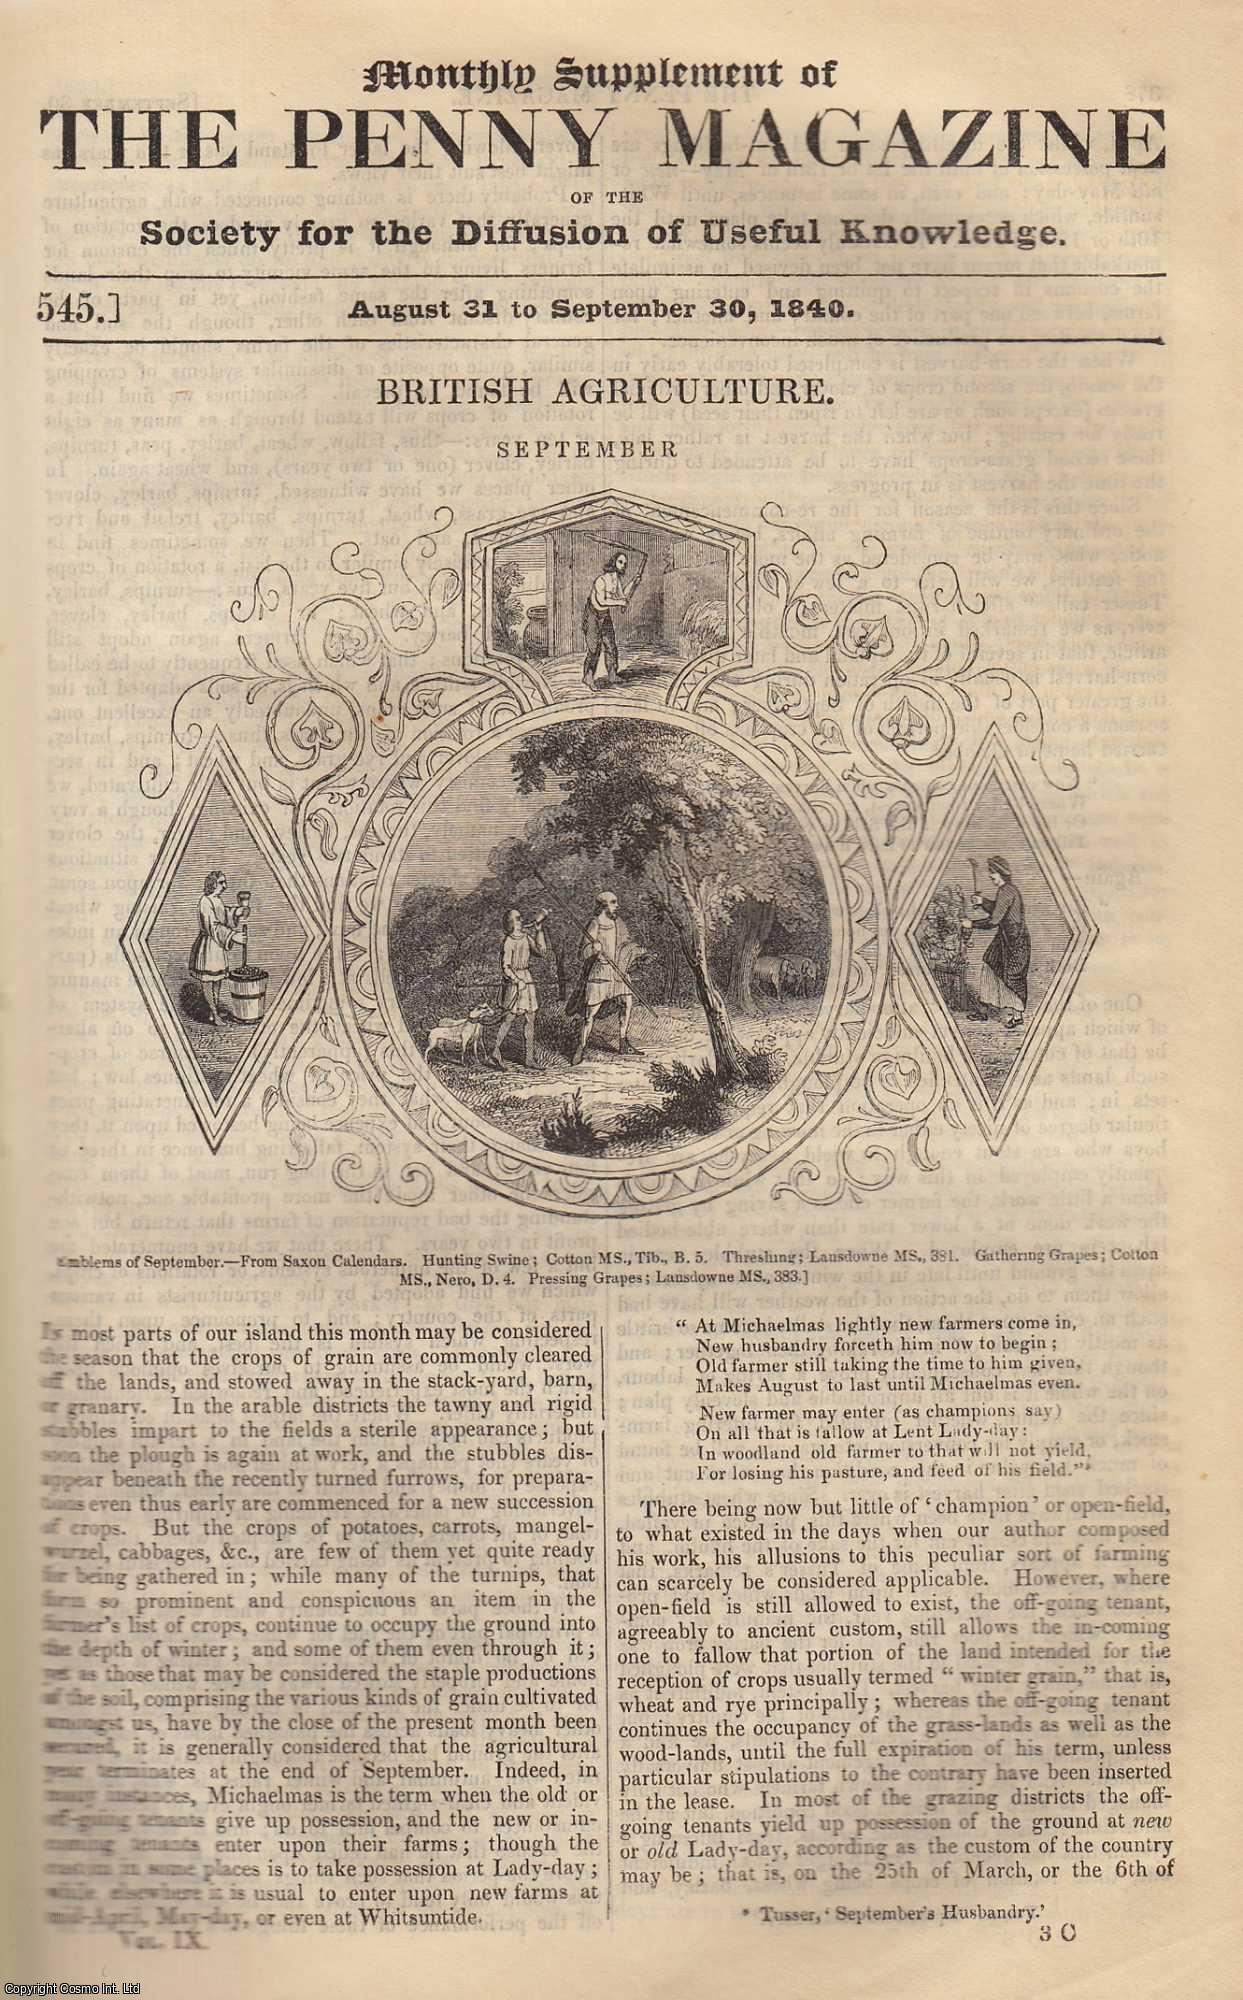 --- - British Agriculture (September). Issue No. 545, September 30th, 1840. A complete rare weekly issue of the Penny Magazine, 1840.